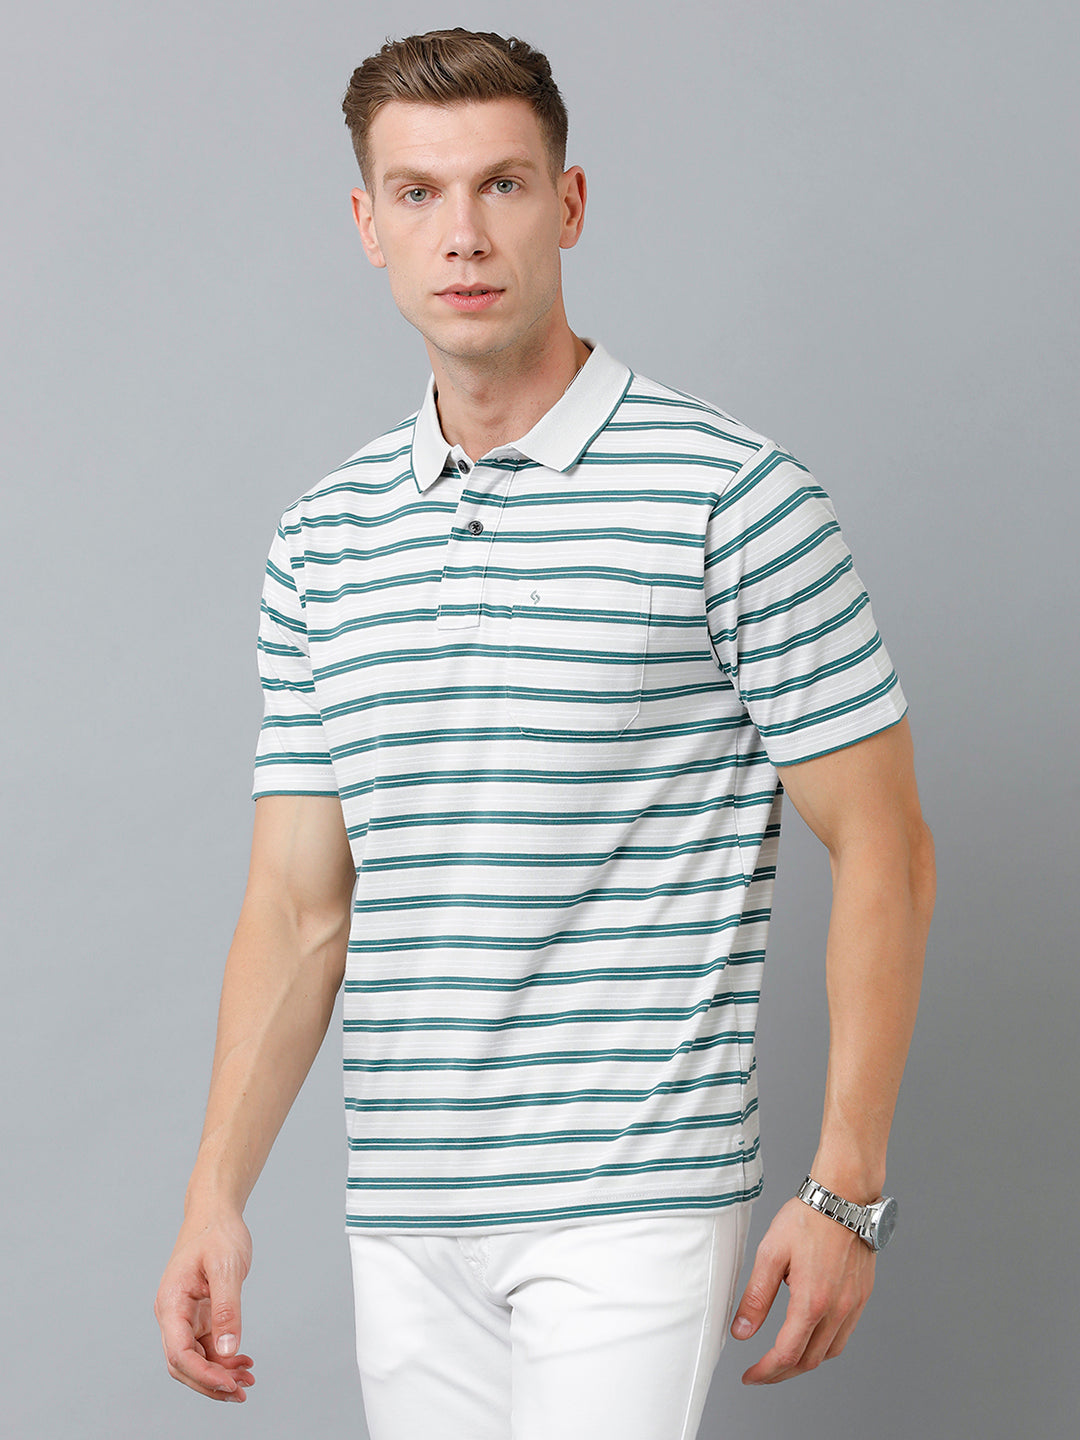 Classic Polo Men's Cotton Half Sleeve Striped Authentic Fit Polo Neck Light Grey Color T-Shirt | Feeders - 219 A